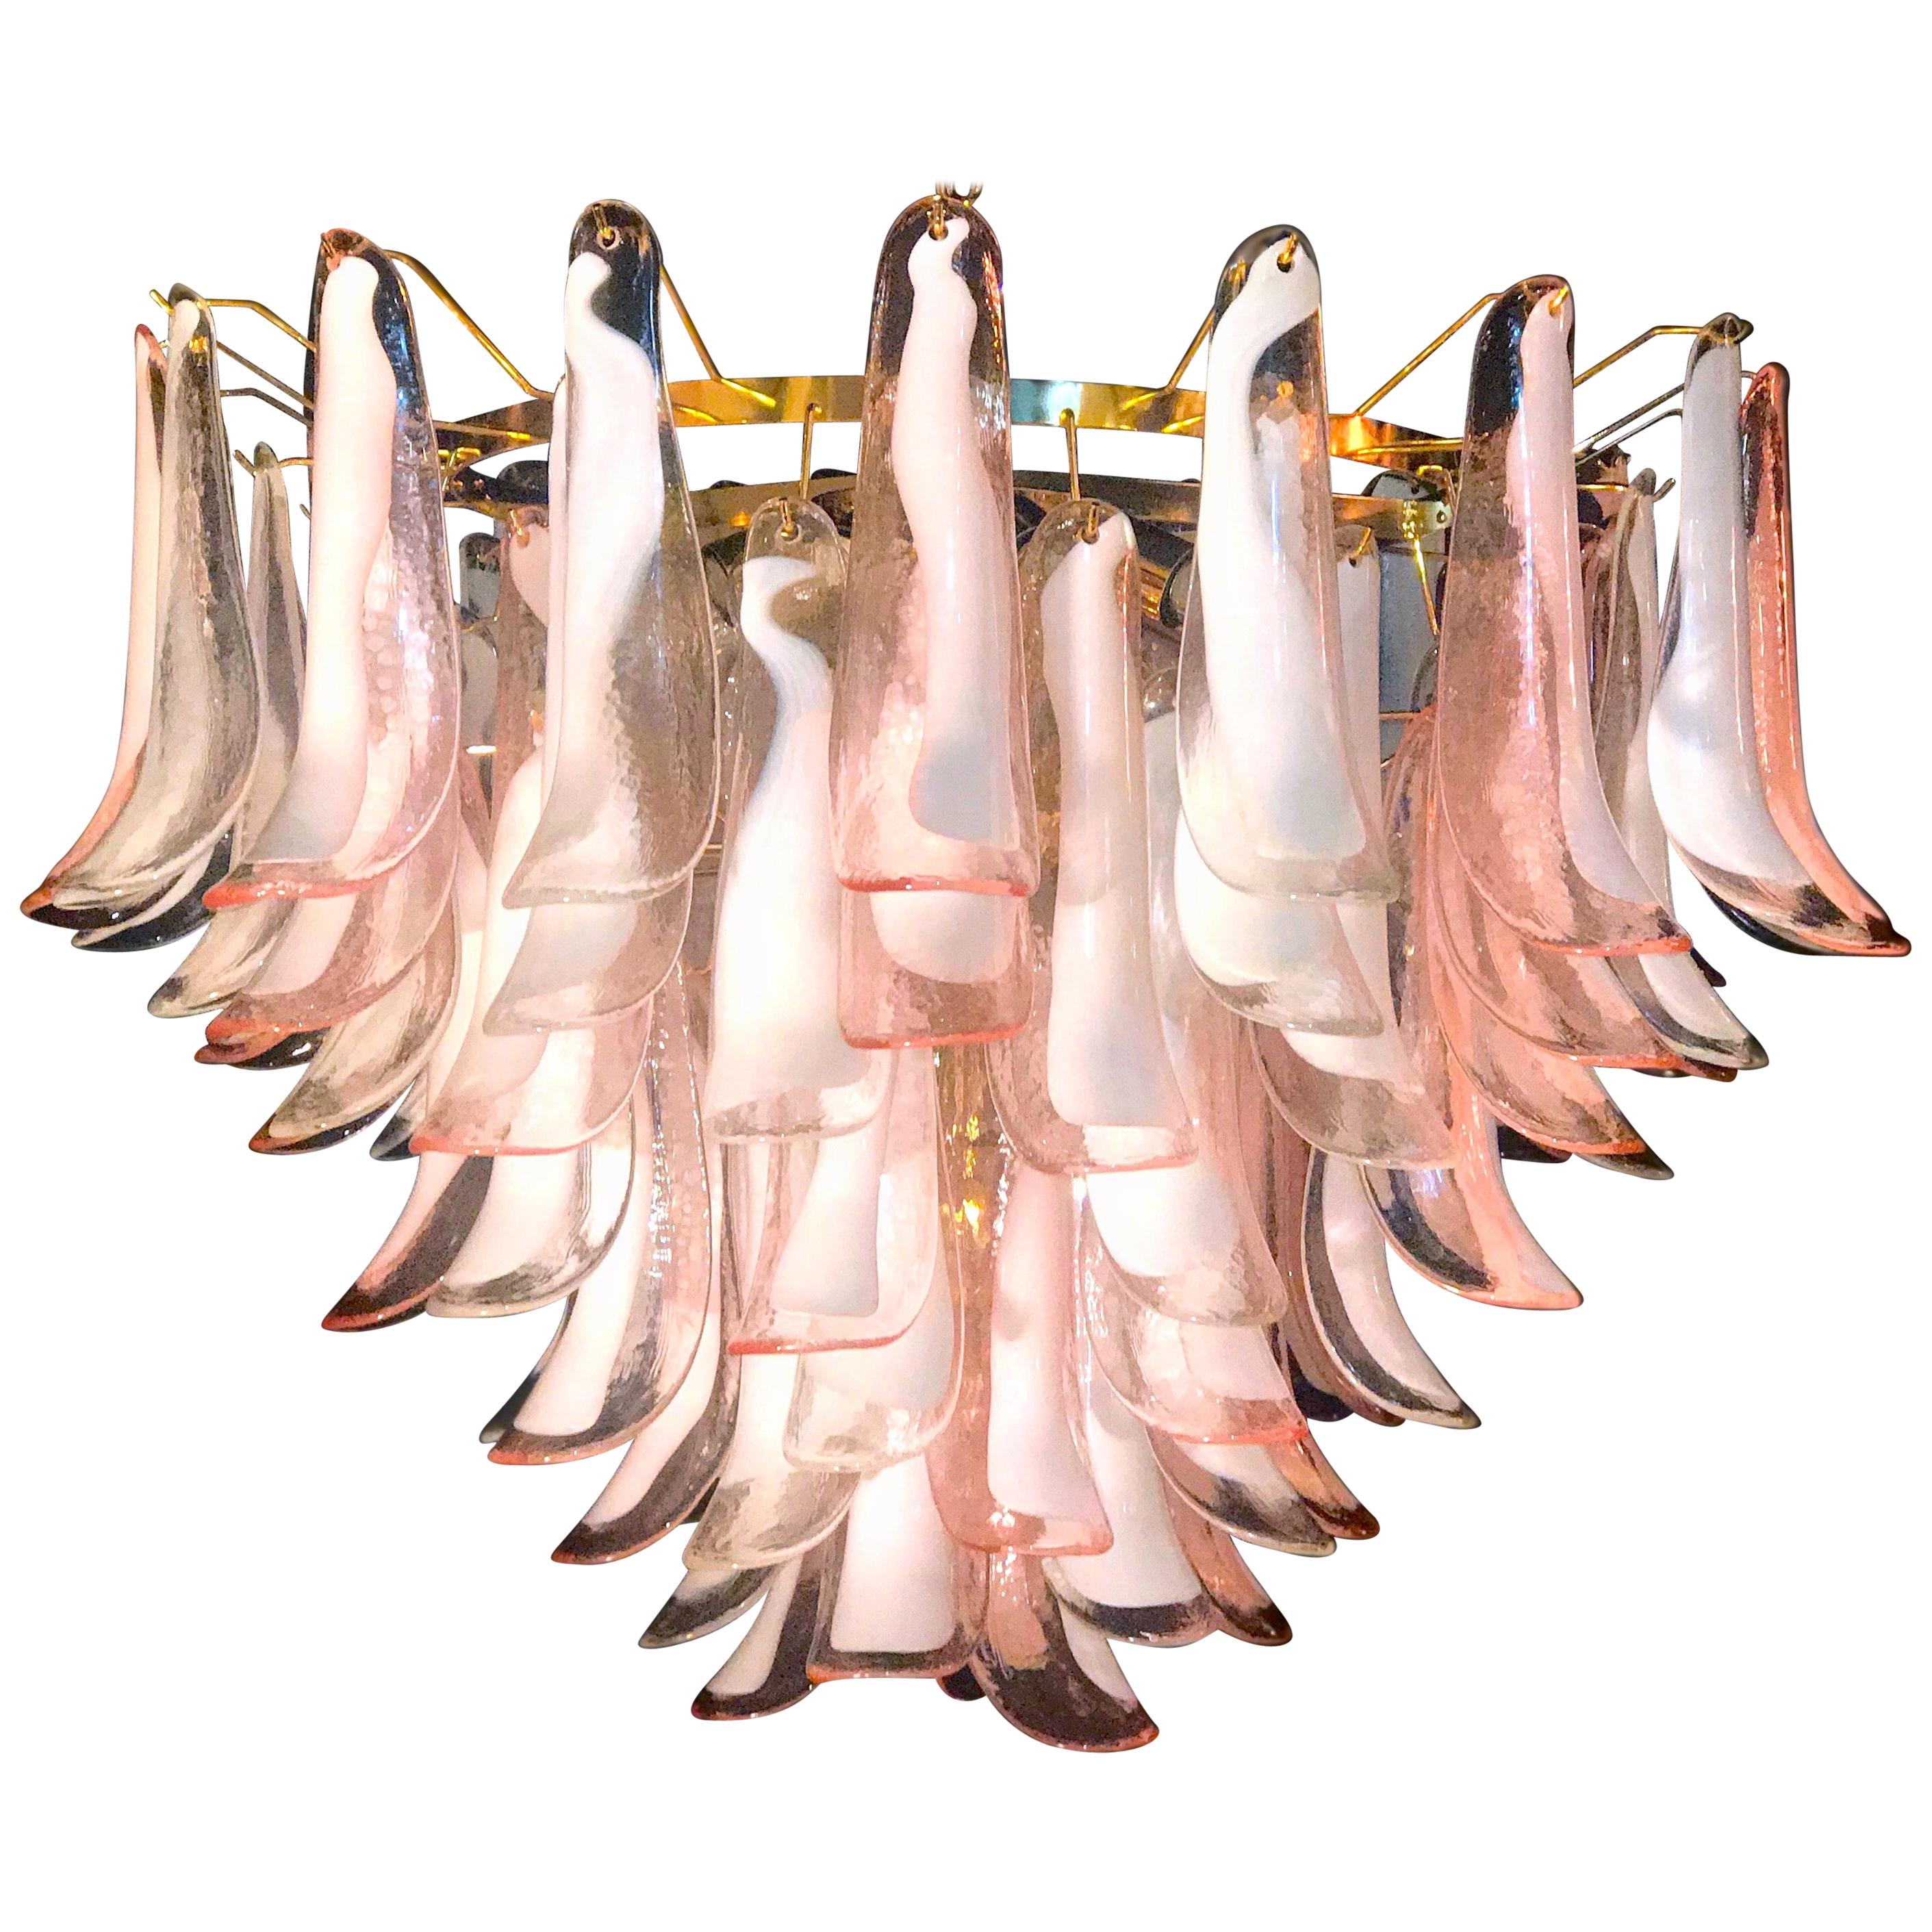 Fabulous Italian chandelier made by 90 pink and white lattimo Murano glass petals supported by a brass frame by Galleria Veneziani.
We can customize the frame, brass or chrome. 

Dimensions: 51.20 inches (130 cm) height with chain, 28 inches (70 cm)